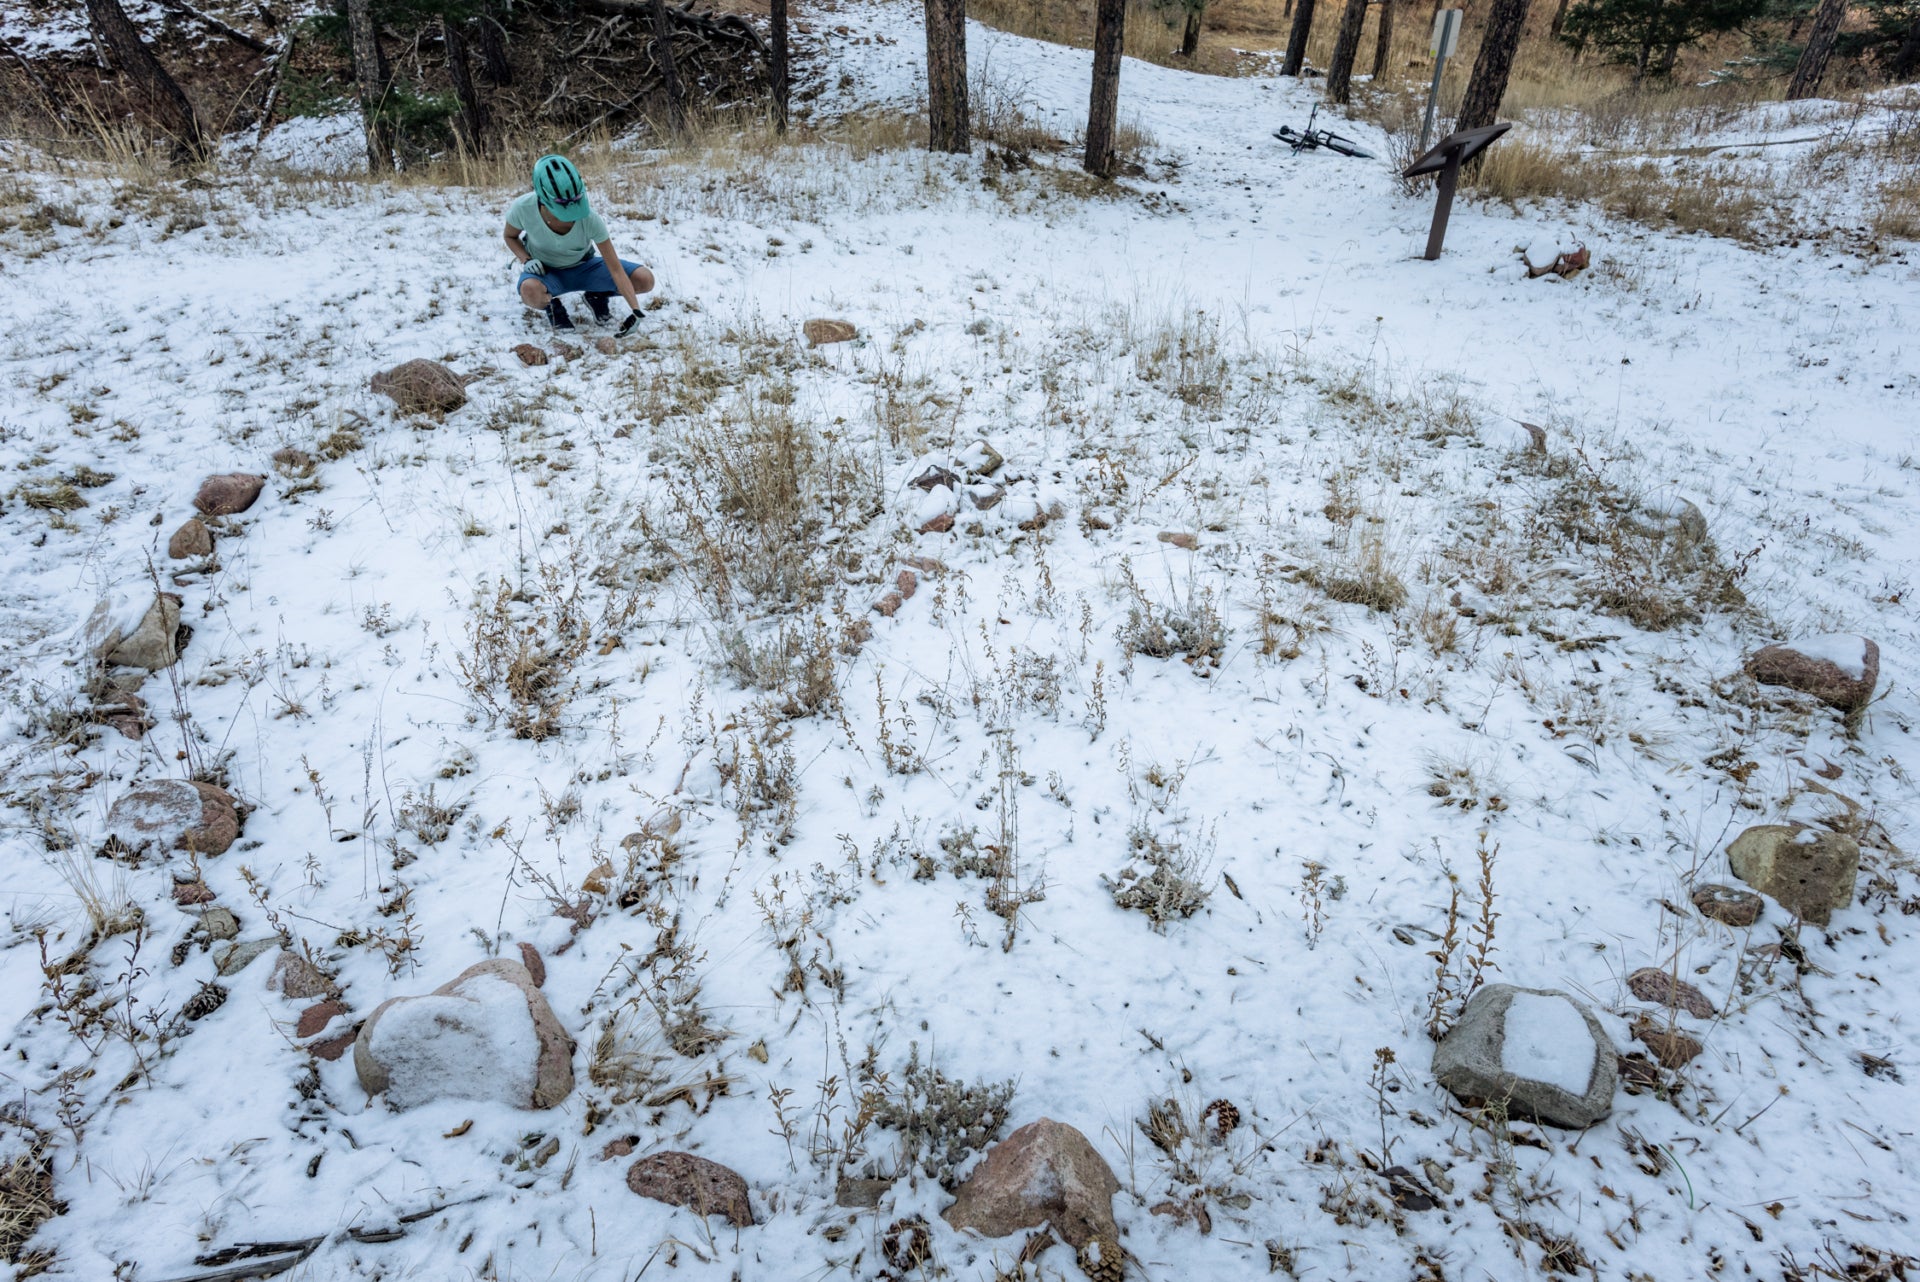 Partially covered by a blanket of snow, this recently constructed Medicine Wheel—also known as a “Sacred Hoop”—remains as deeply sacred to modern Indigenous peoples as it was to their ancestors. Photo: Leonardo Brasil